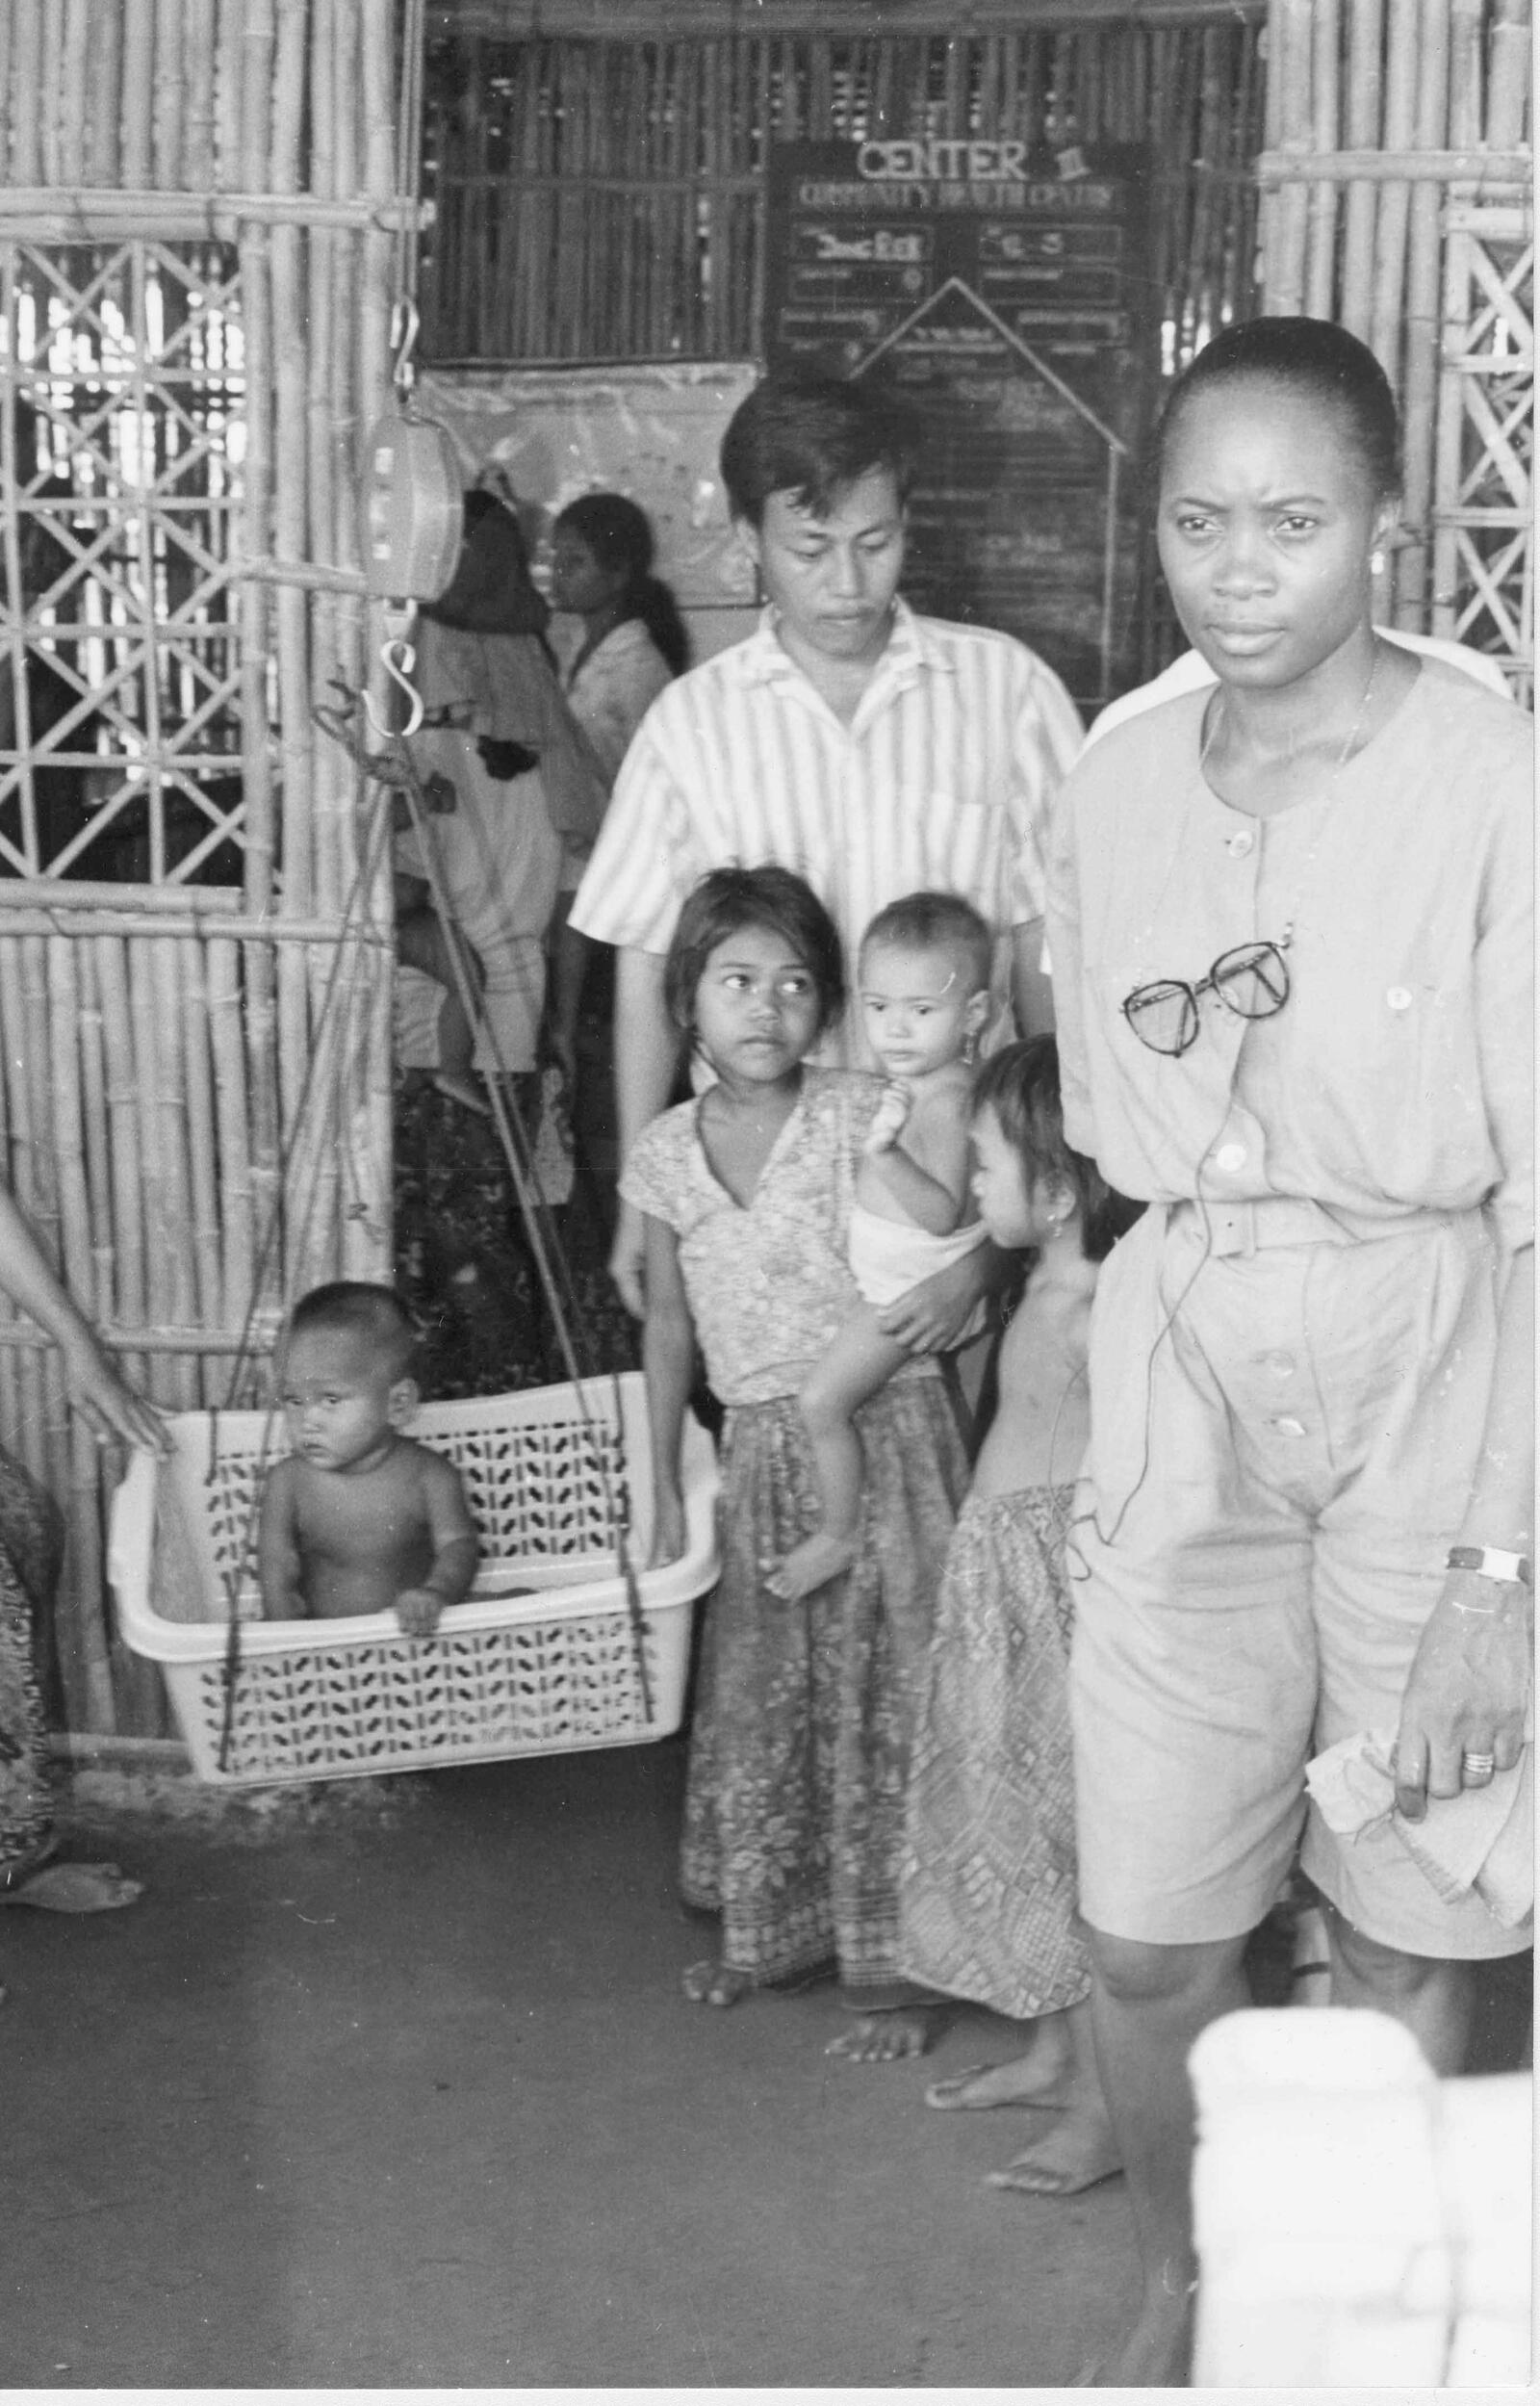 Barbara visiting a Community Health Centre in Khao I Dang Camp for Khmer refugees, Prachinburi Province in Thailand, in September 1991.